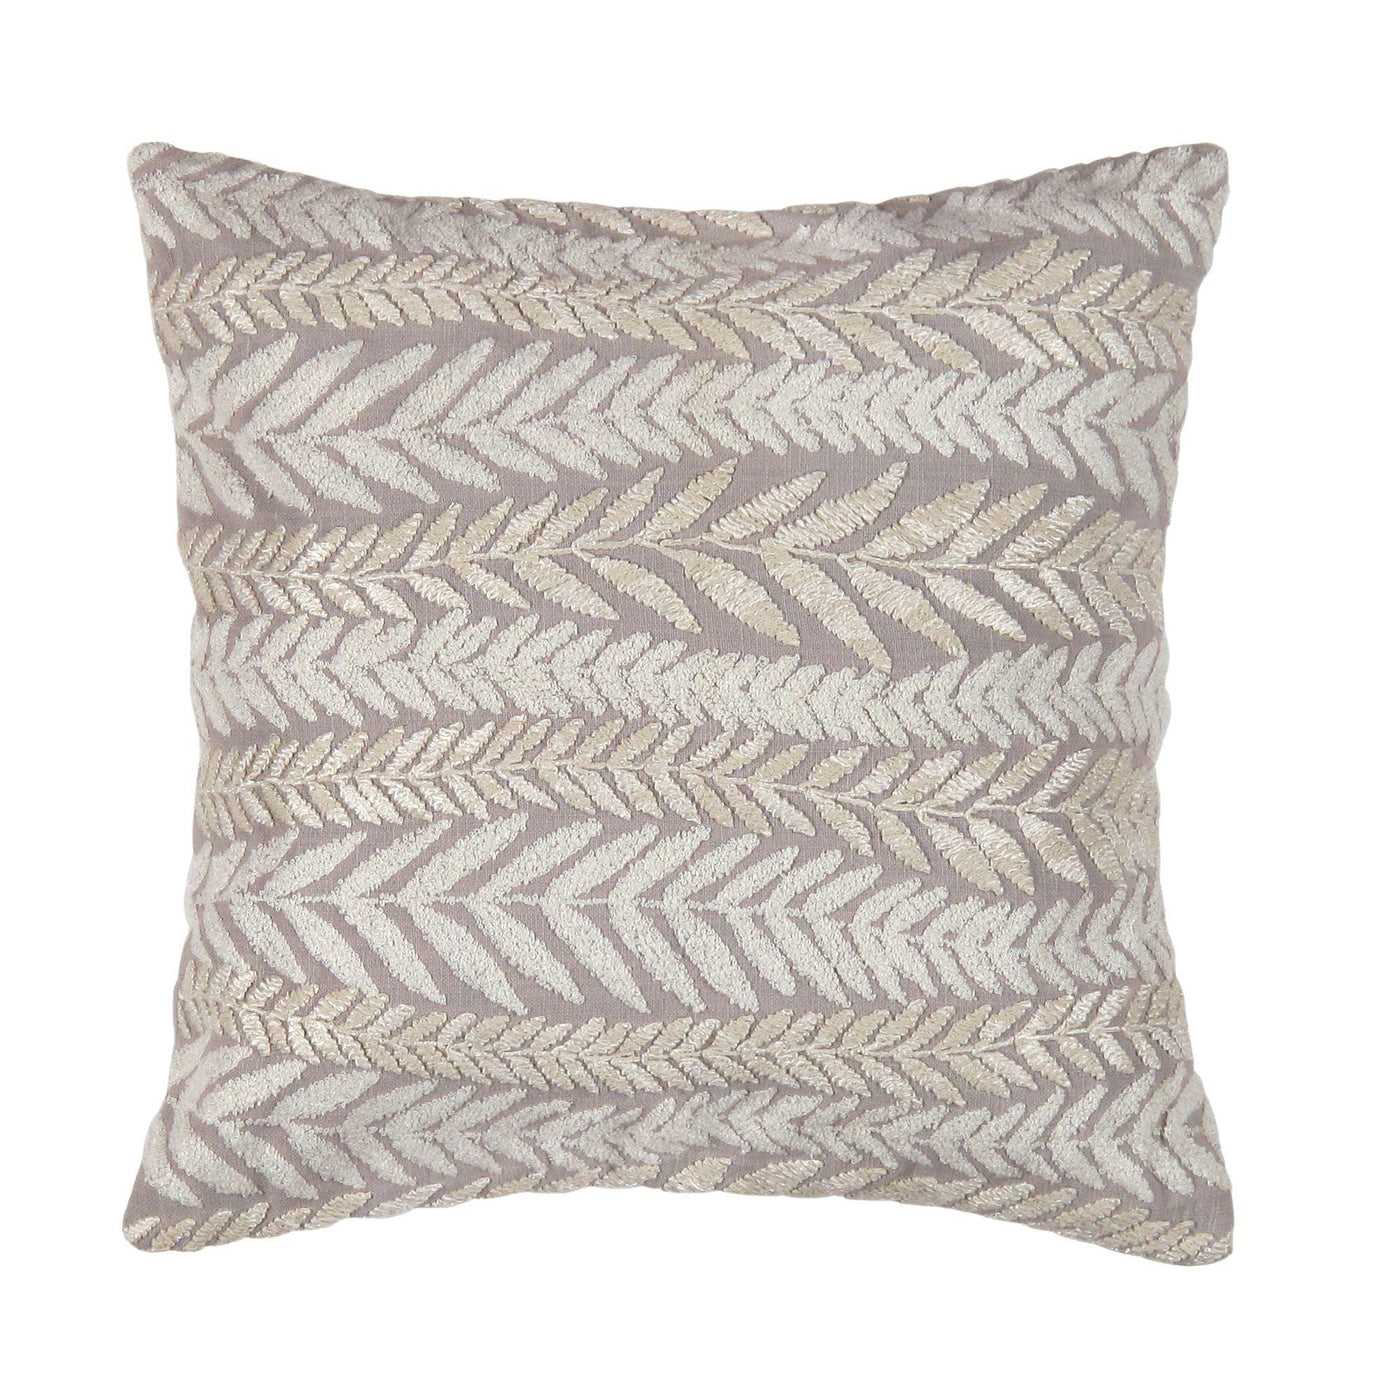 Canvello Neples Embroidered Pillow 20" x 20"